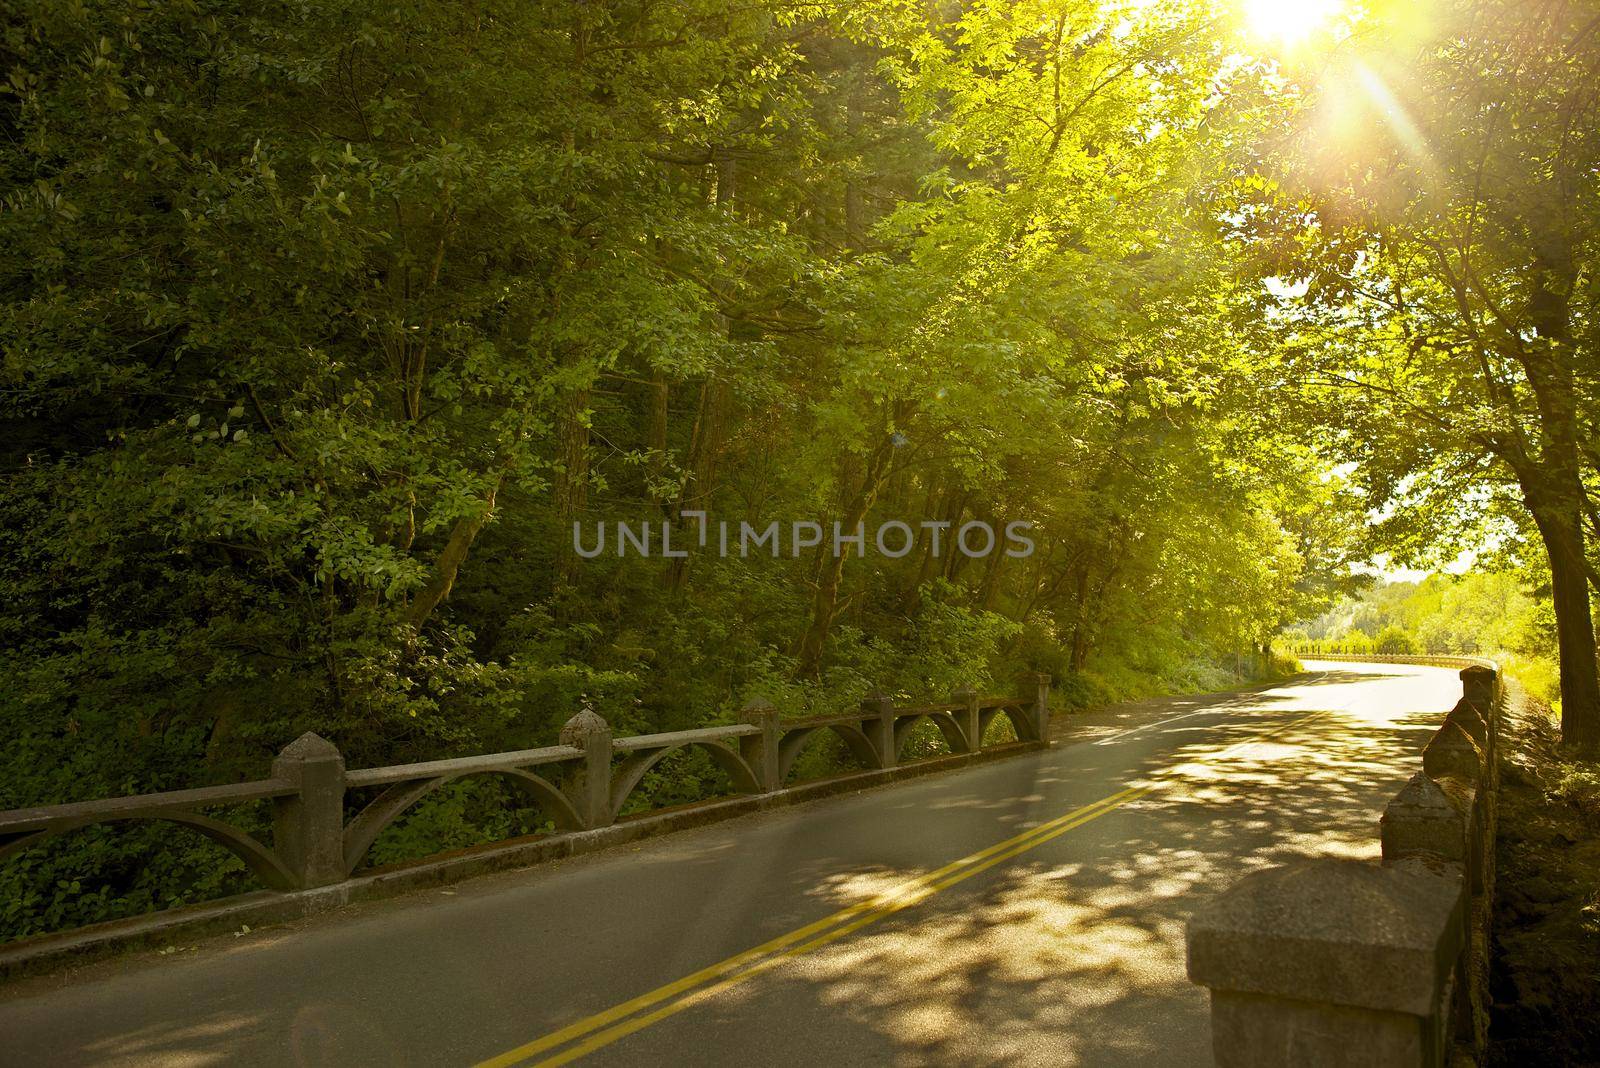 Oregon Road -Mid Summer Road Along Columbia River Gorge. Bright Summer Sun Between Branches. 